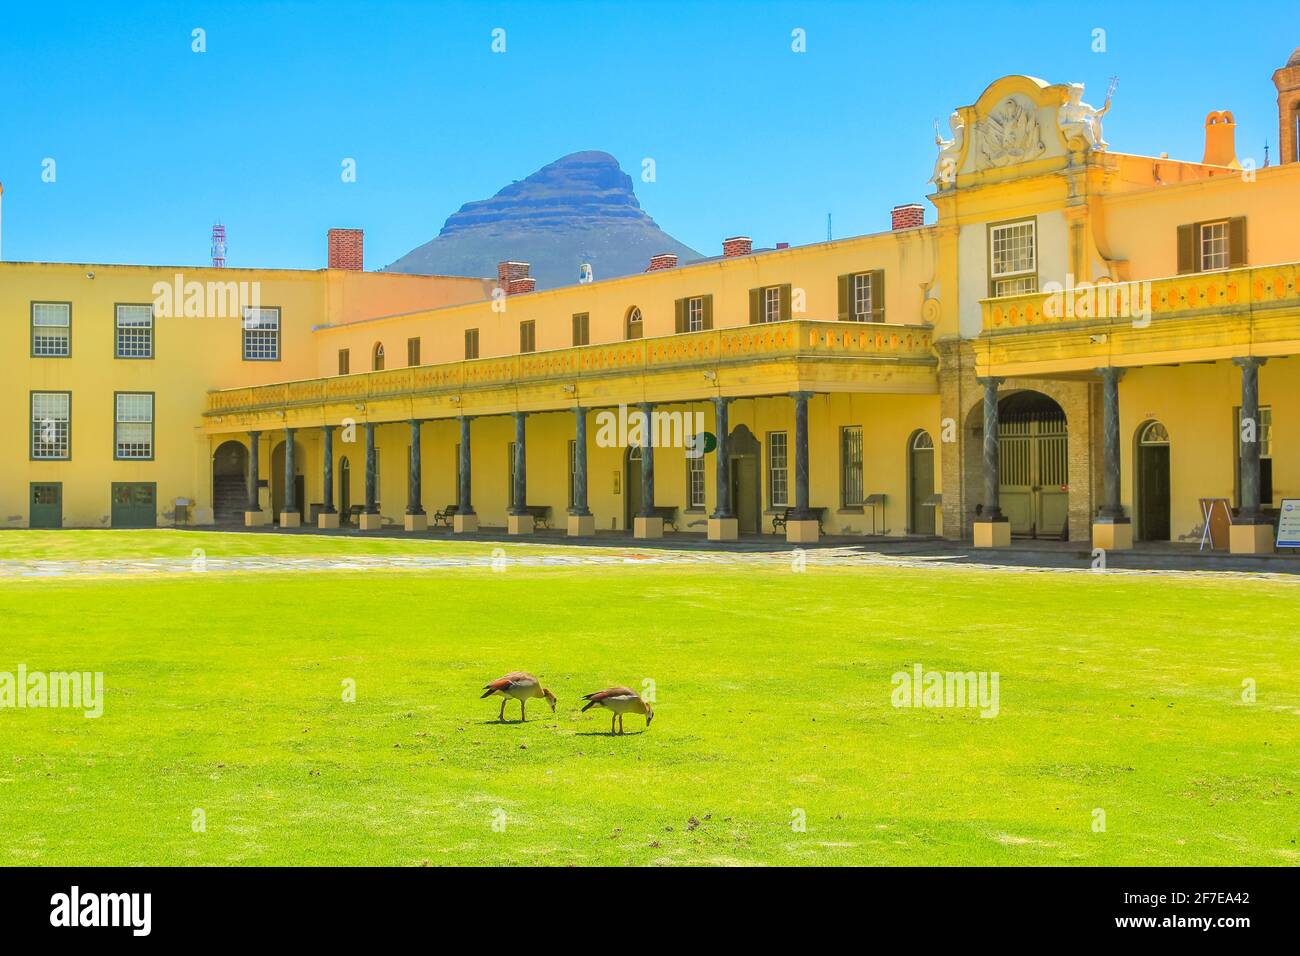 Cape Town, South Africa - January 11, 2014: green courtyard of Castle of Good Hope of Cape Town legislative capital city of South Africa with Table Stock Photo